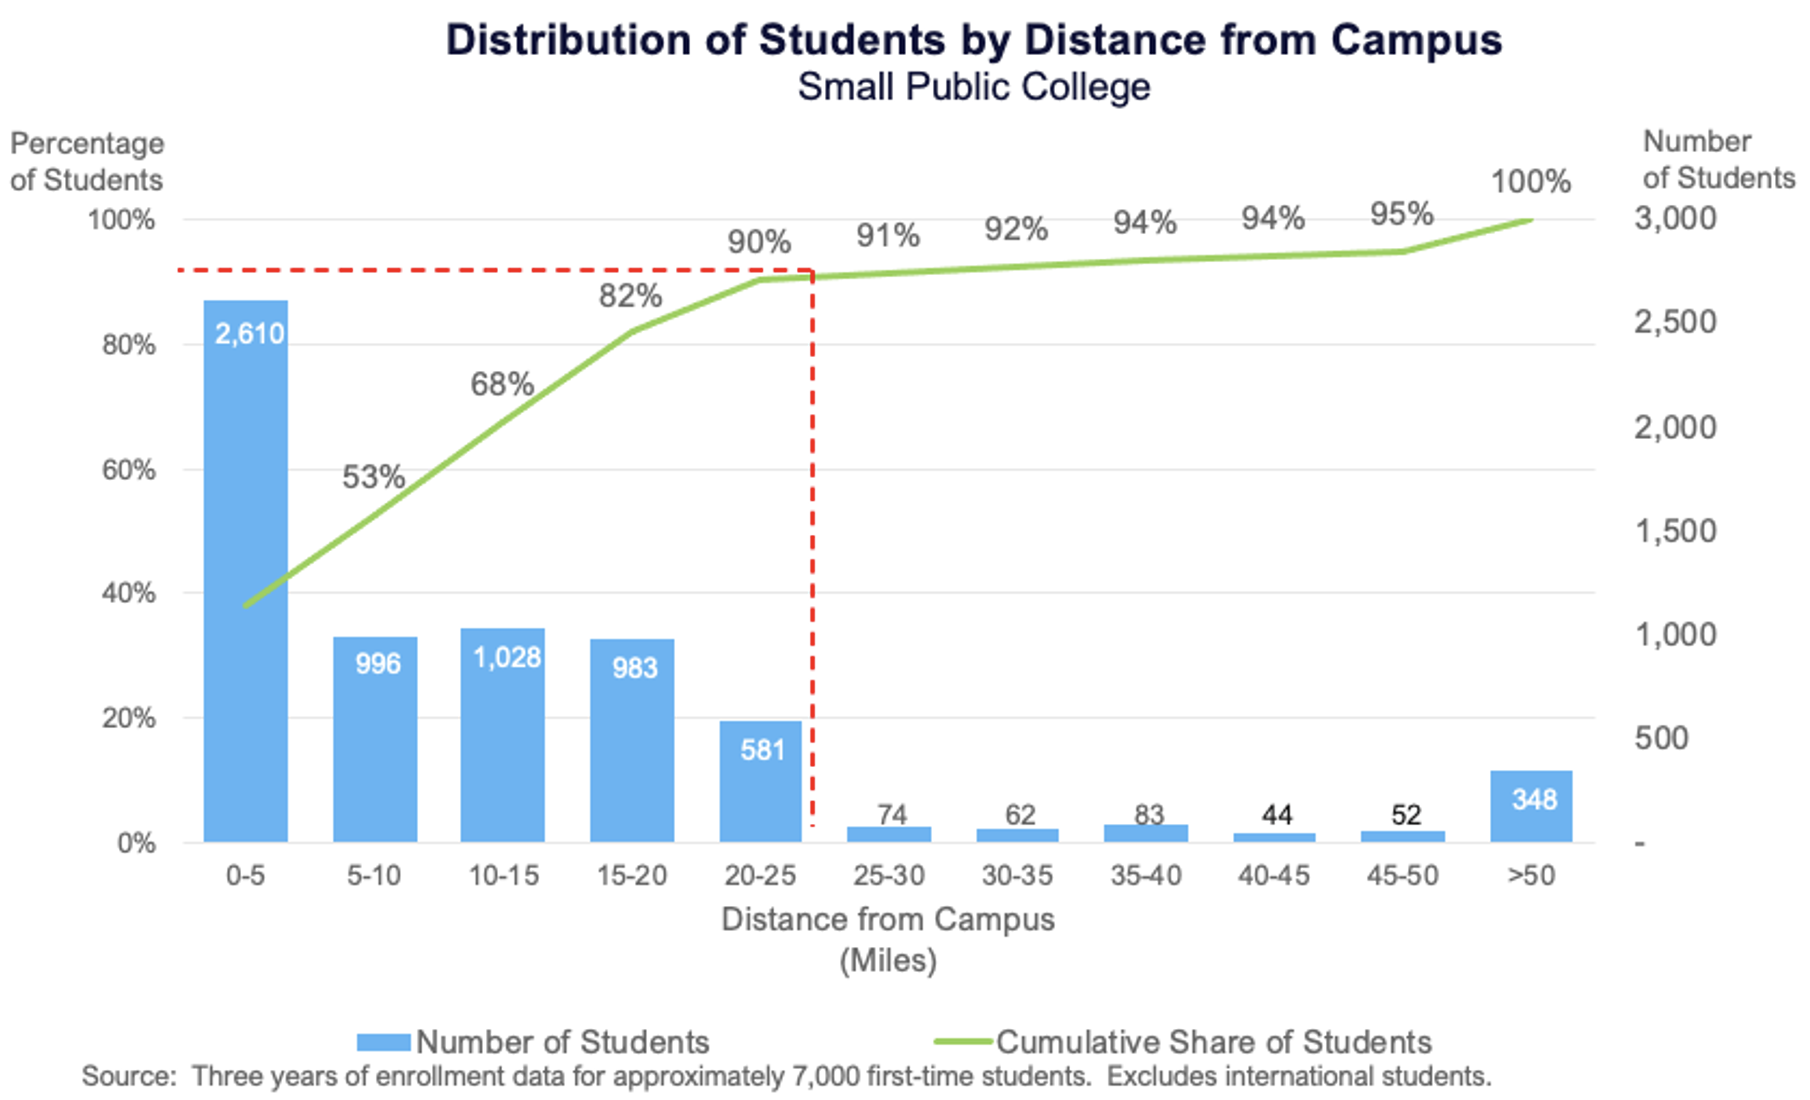 Distribution of students from campus